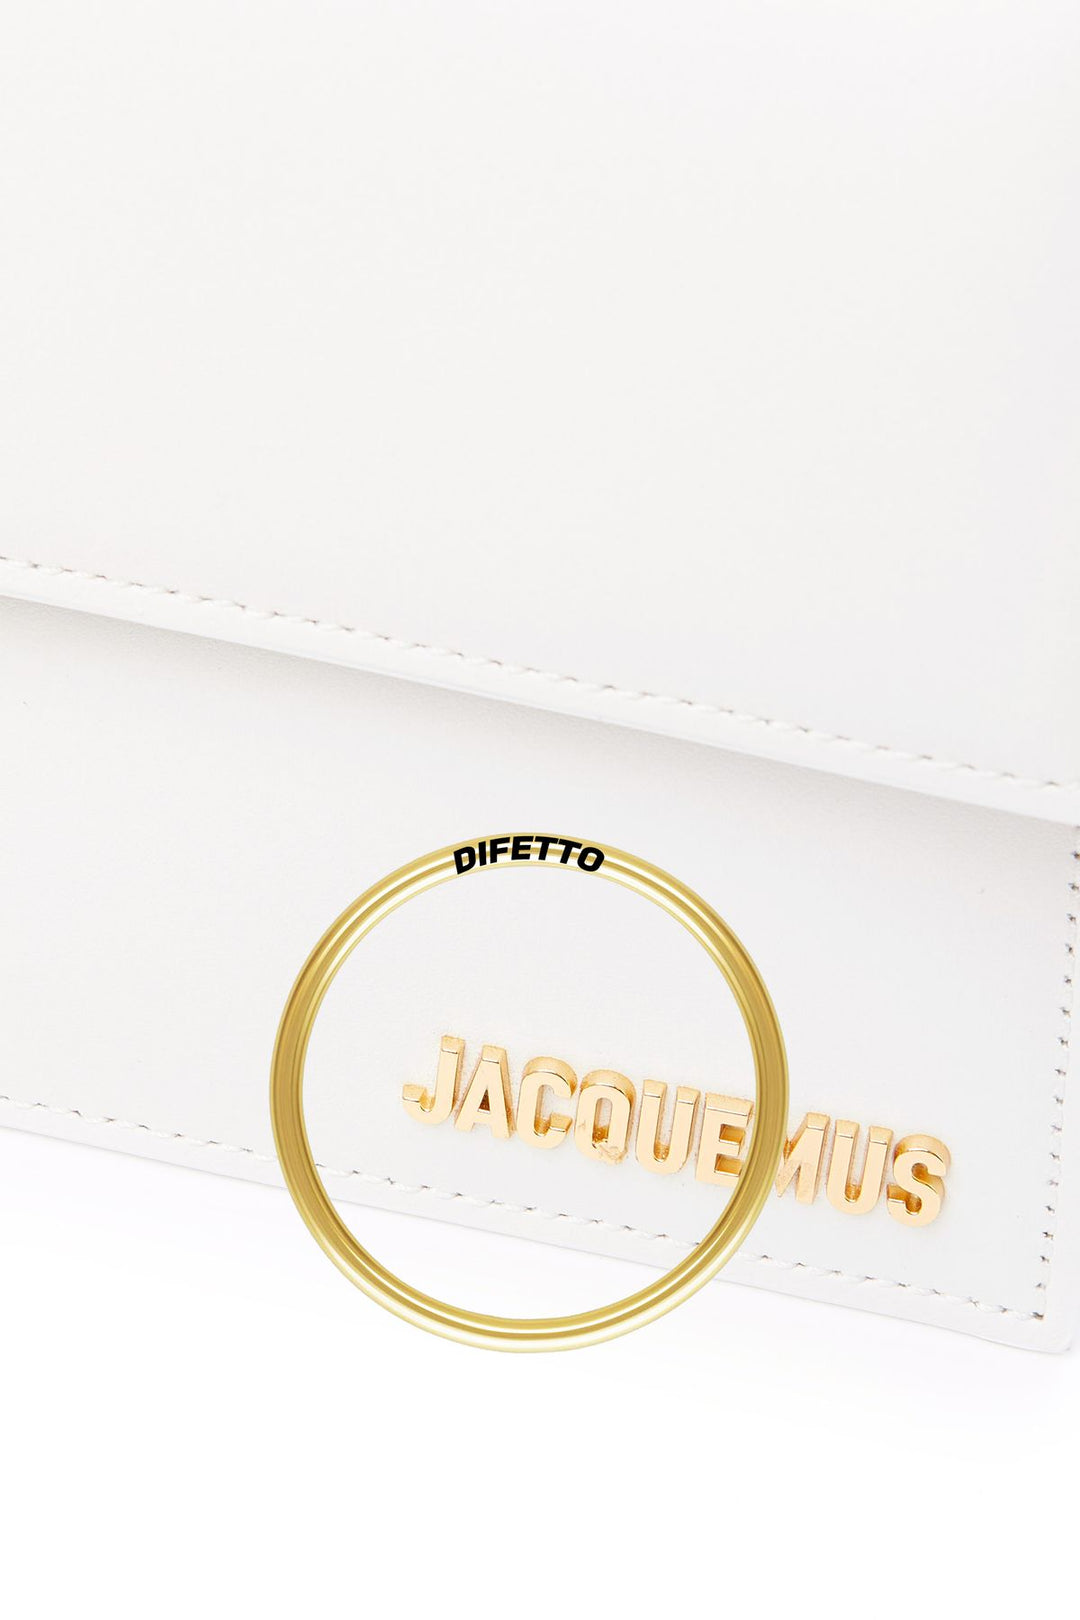 Le Bambino Long Jacquemus leather bag in white